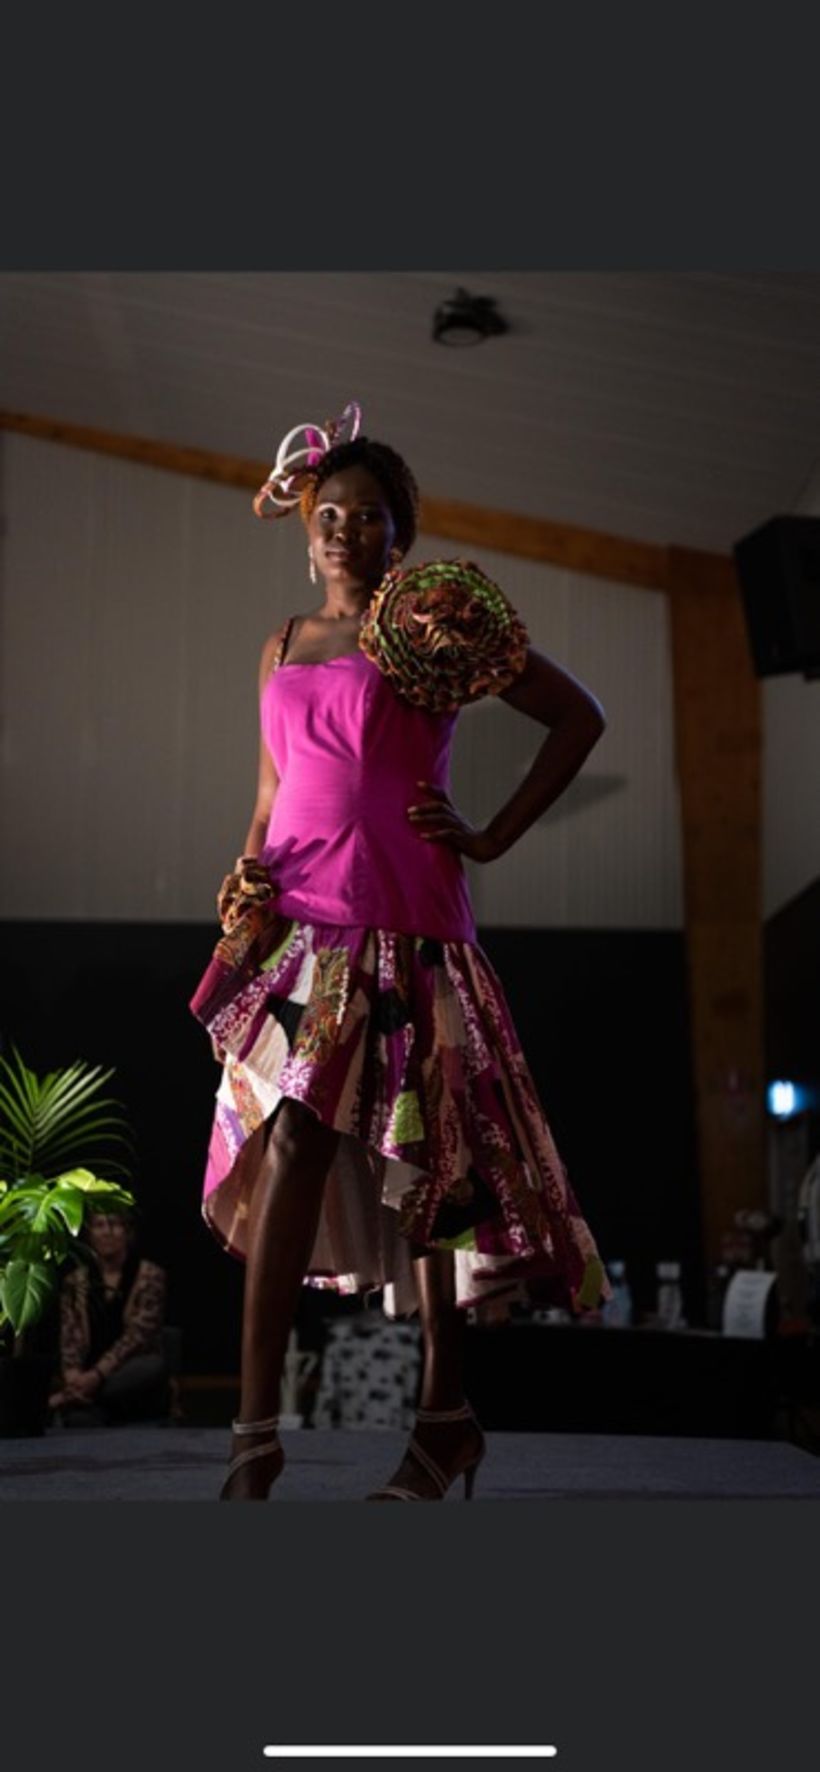 Recycled Runway Entry 2021 "Africa" theme 4